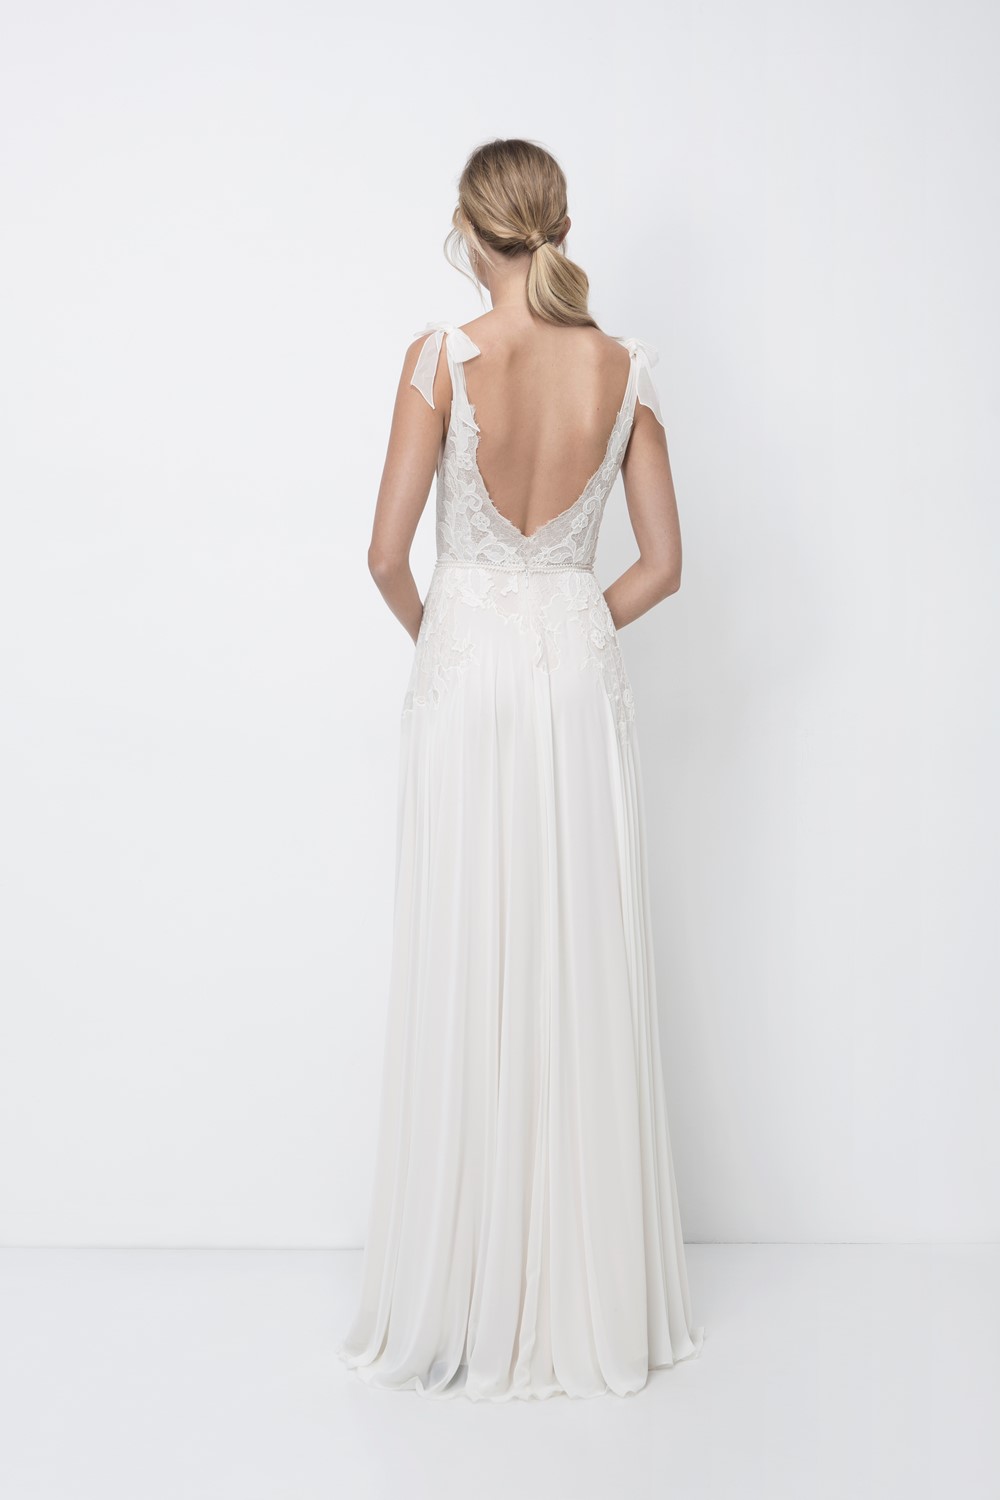 Camilla Wedding Dress from Lihi Hod's 2018 Bridal Collection